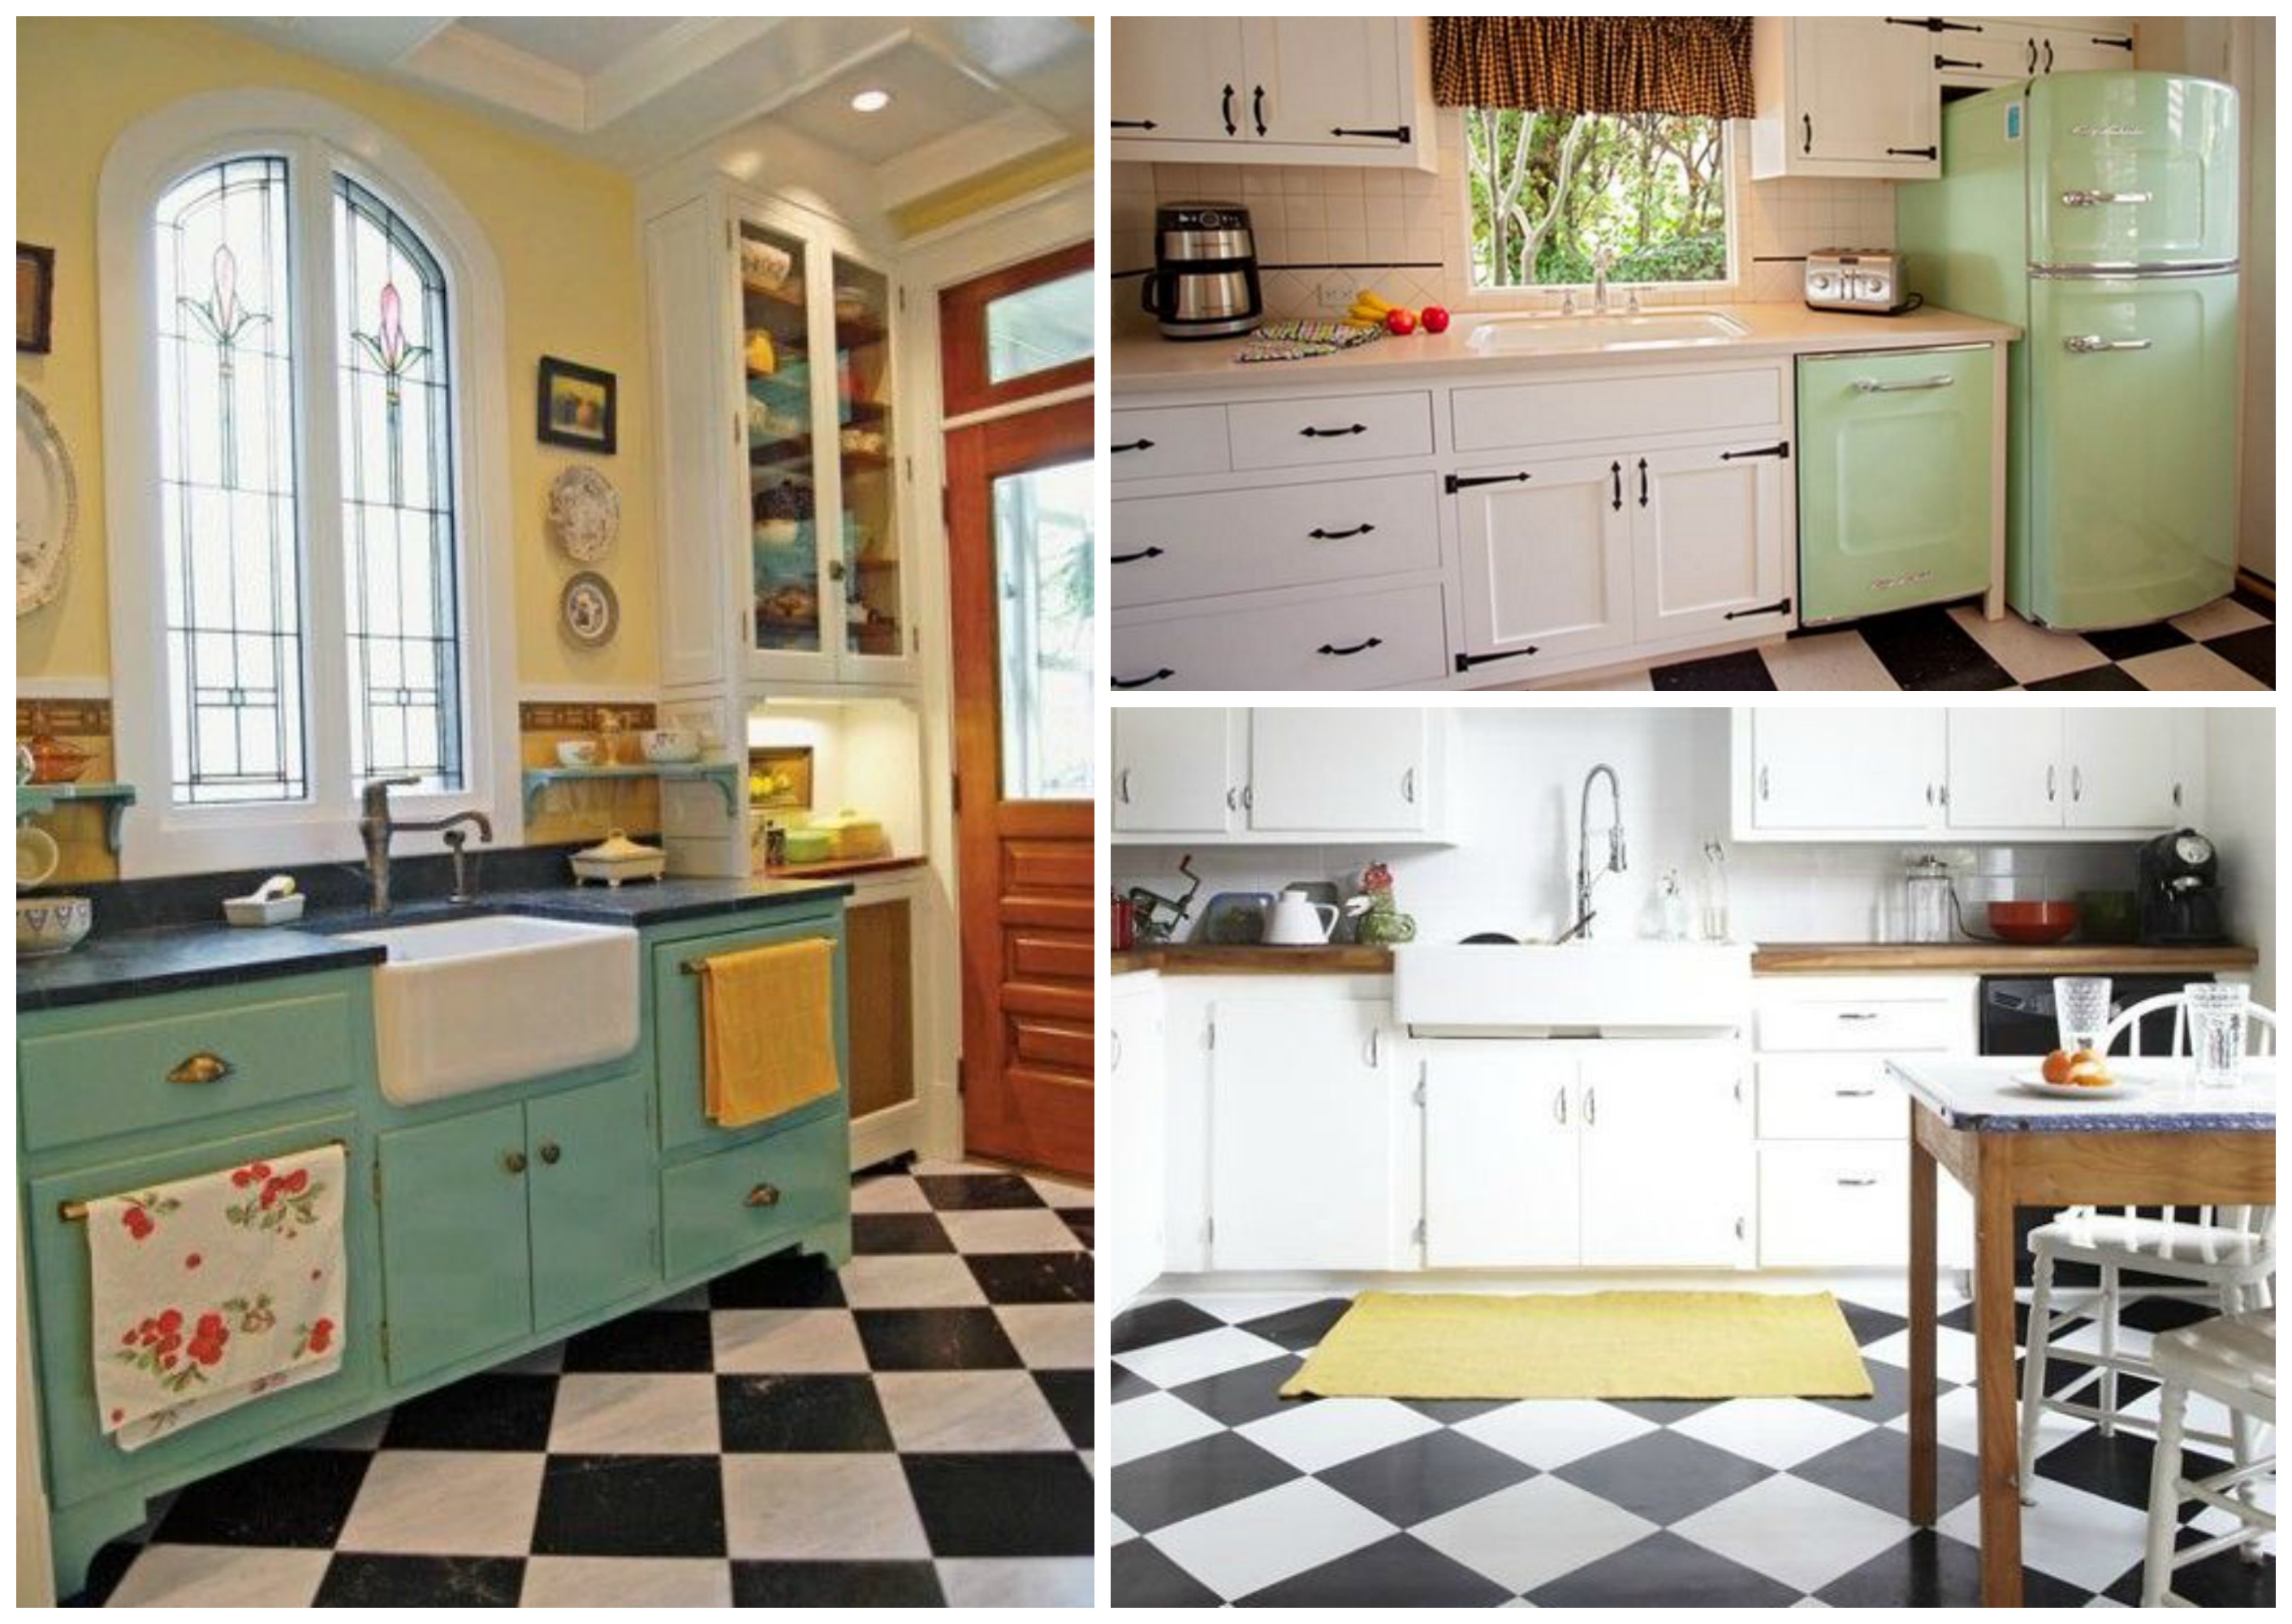 If creating a true retro kitchen, a checkered tile floor is an absolute  must. A classic and timeless option would be to stick with a black and  white color